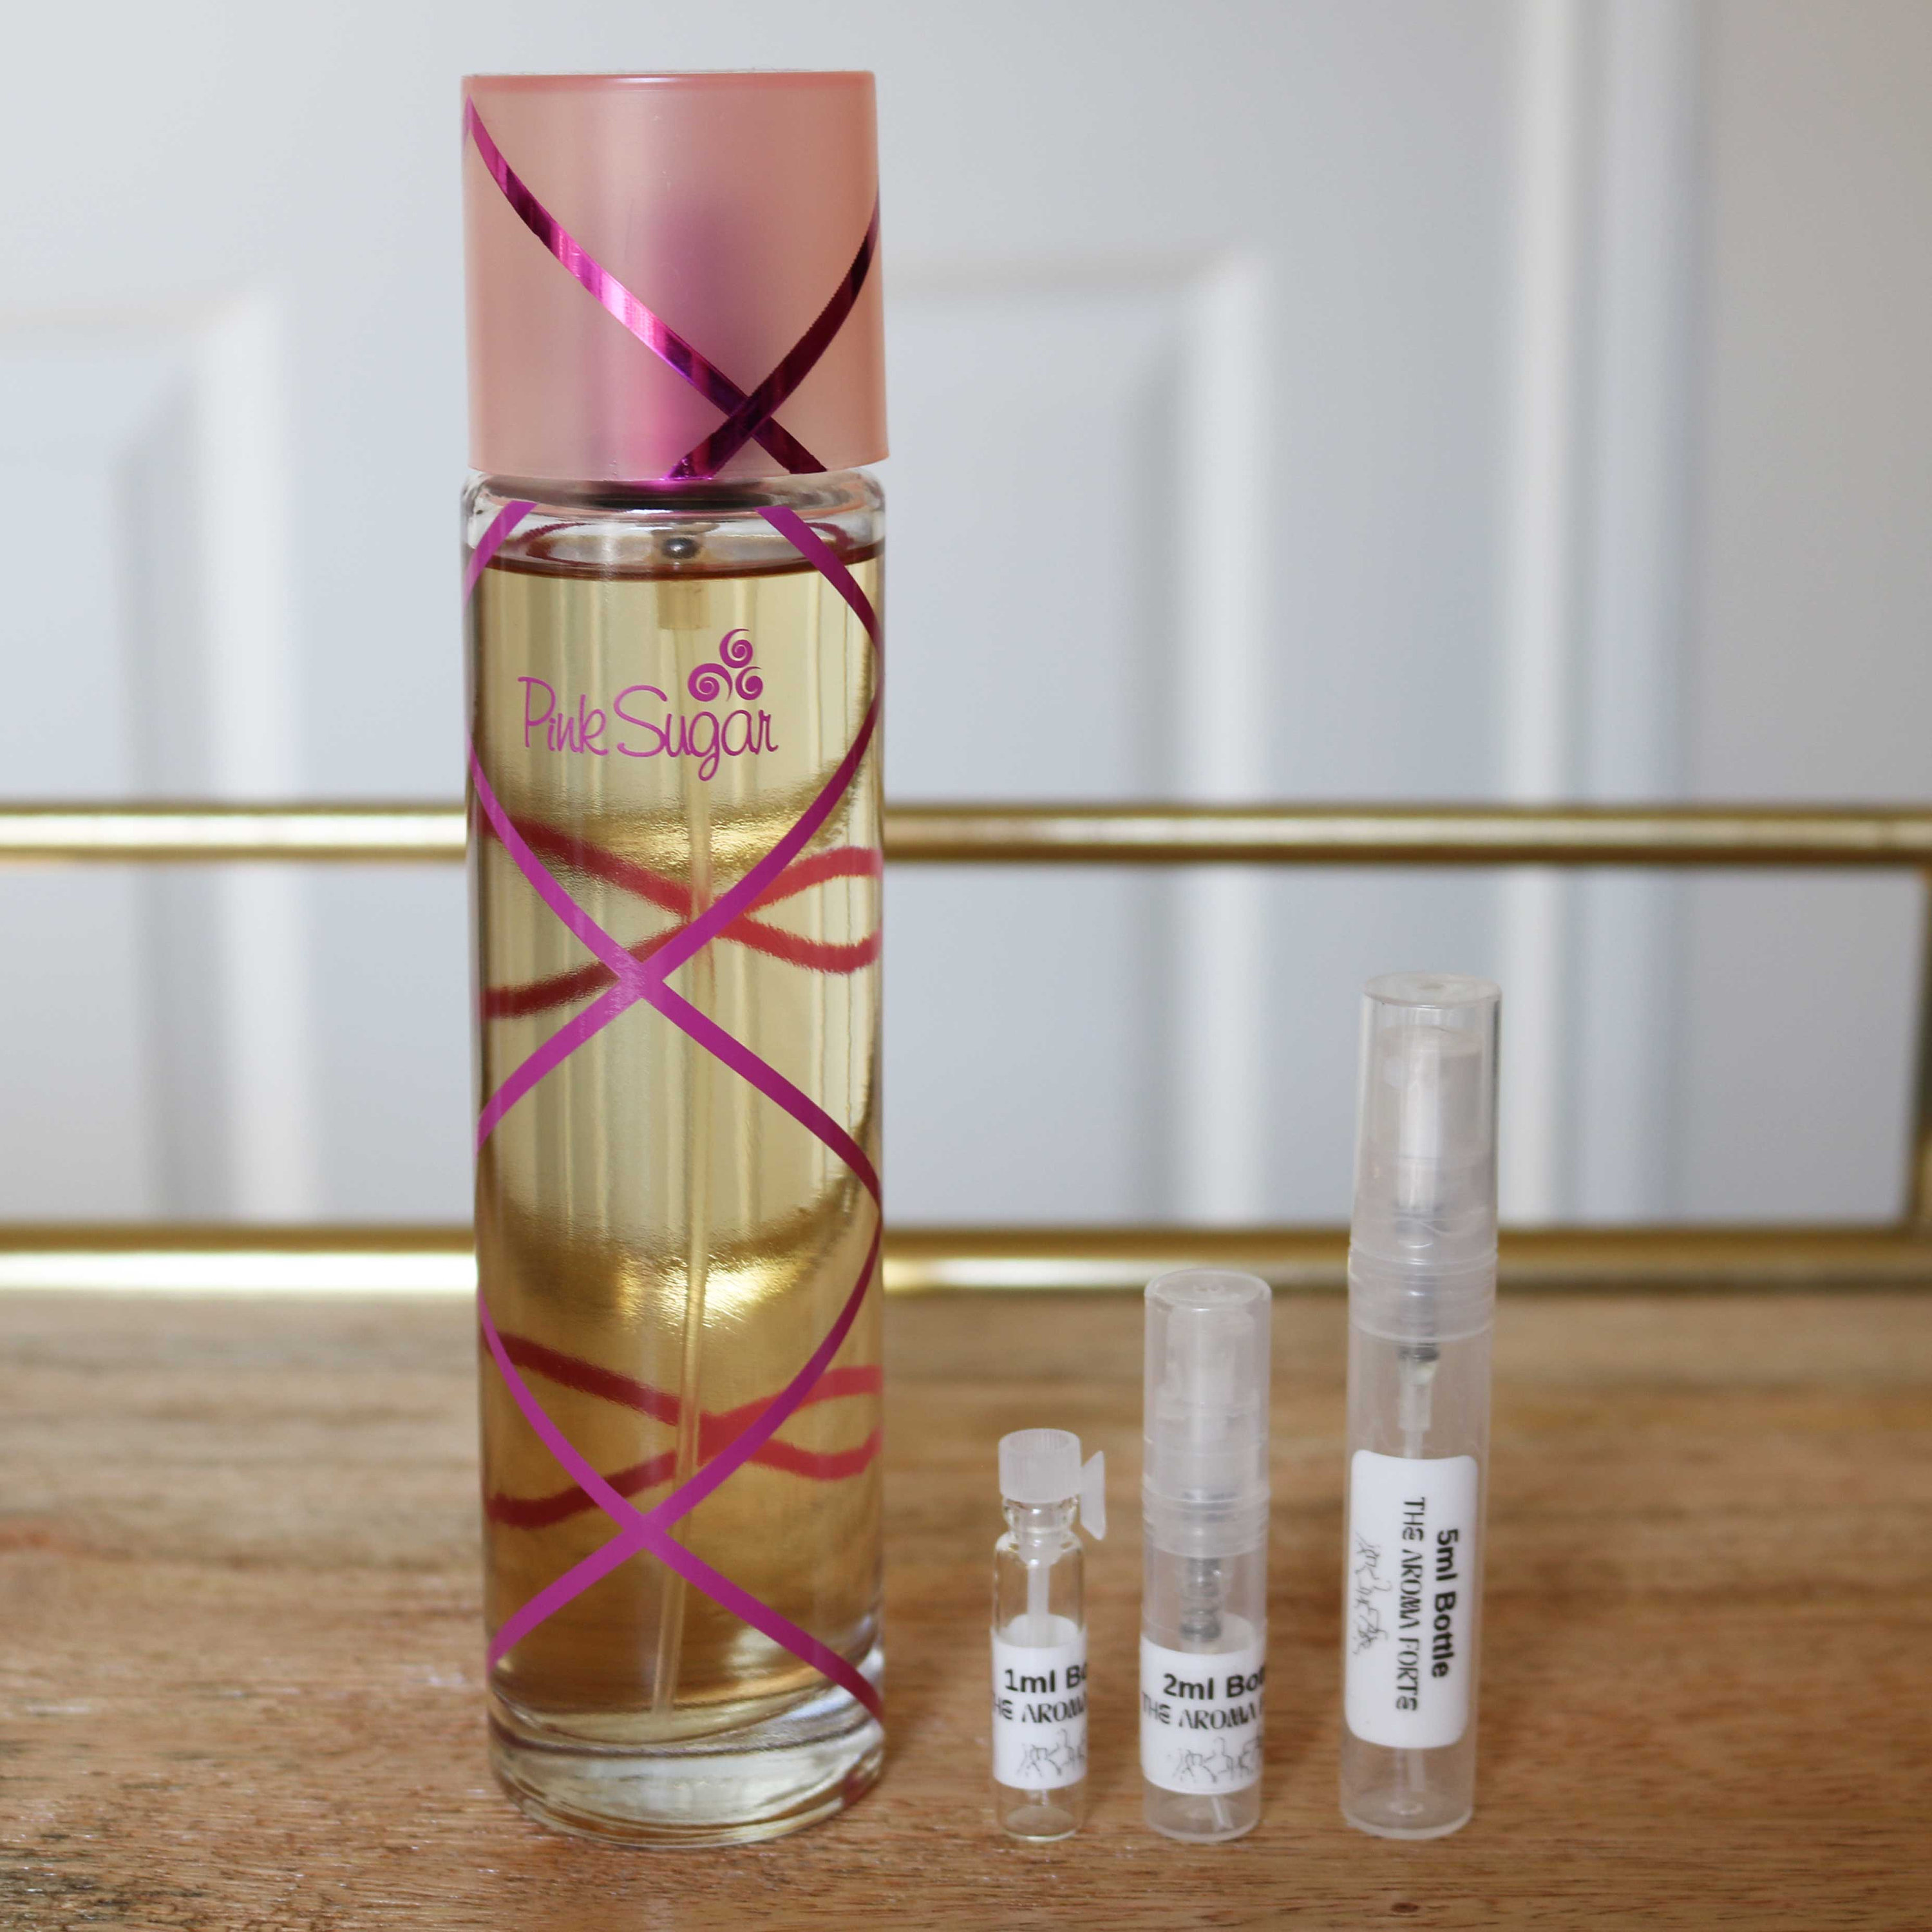 WagsMarket - Pink Sugar Perfume Oil, Choose from 0.33oz Roll On to 4oz  Glass Bottle (4oz Glass Bottle)